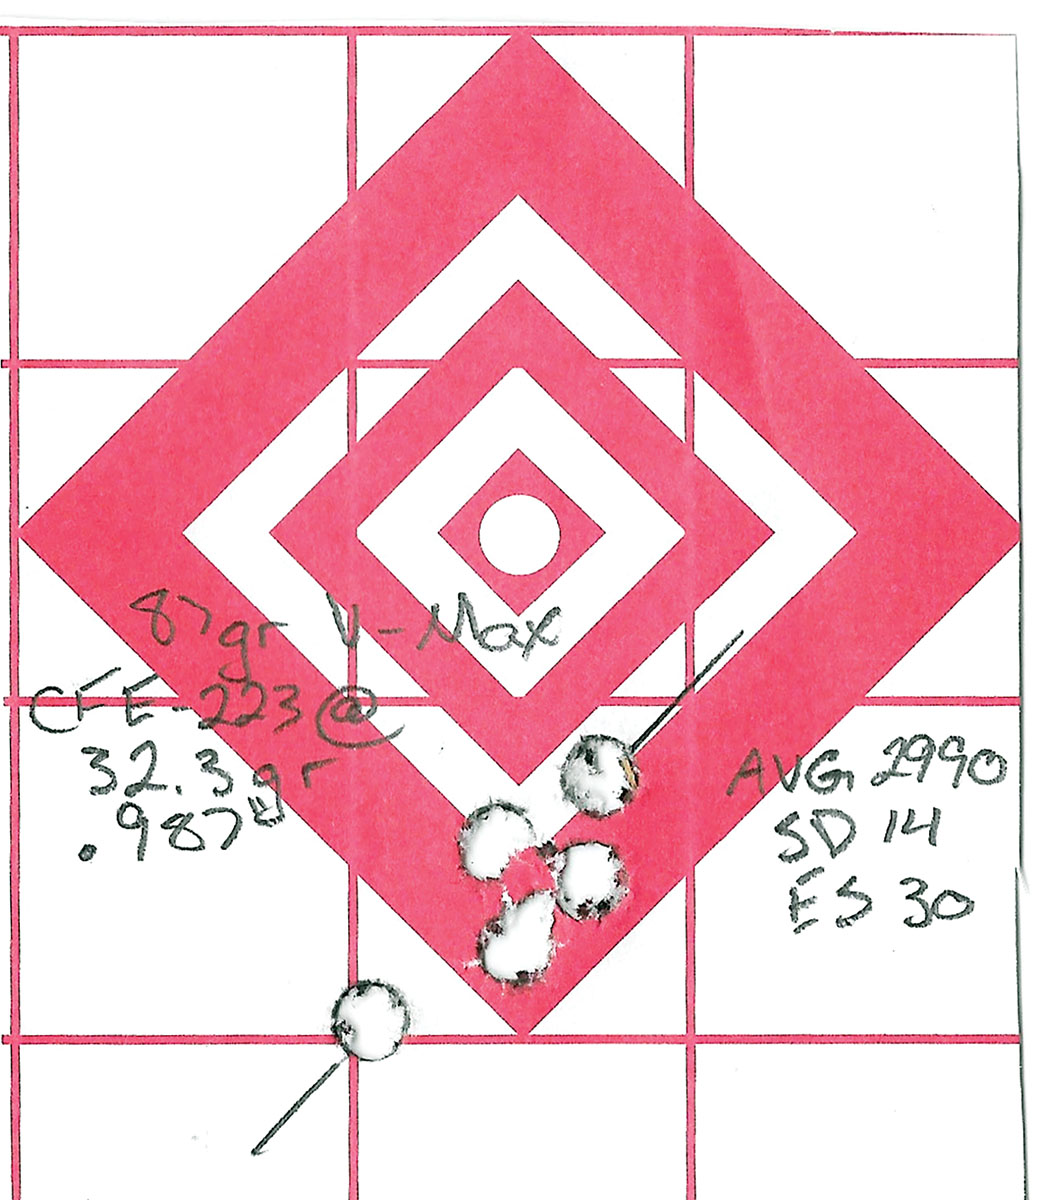 This is the final test target featuring a five-shot group for the 87-grain V-MAX and CFE 223 combination.